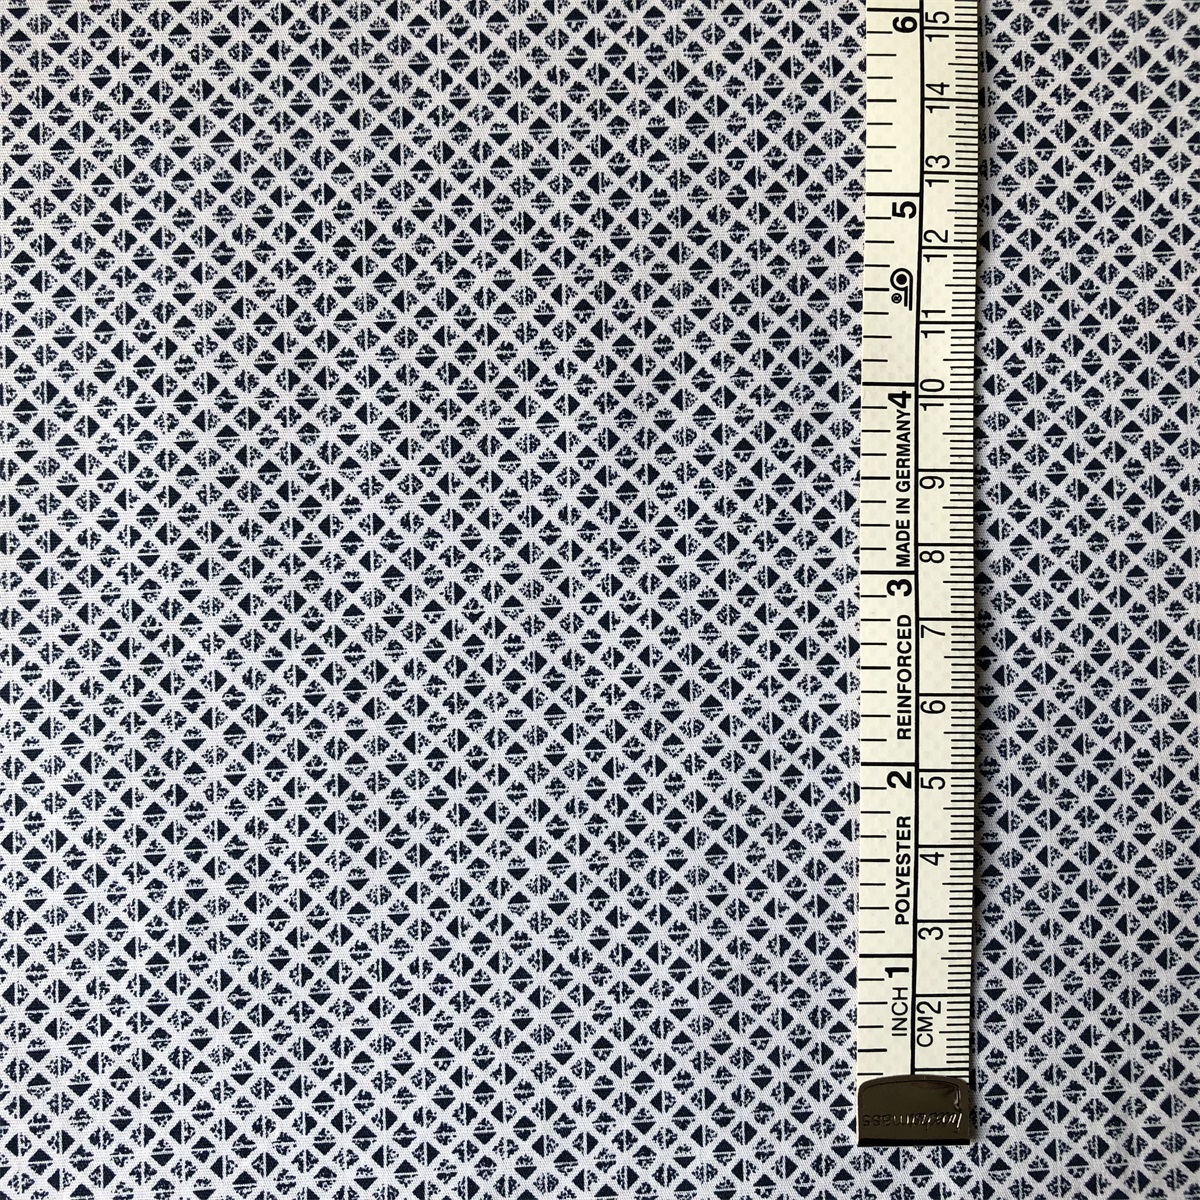 New Cotton Spandex Printed Fabric by compact yarn for men's shirts 98% cotton 2% spandex poplin printed shirts woven stretchy fabric